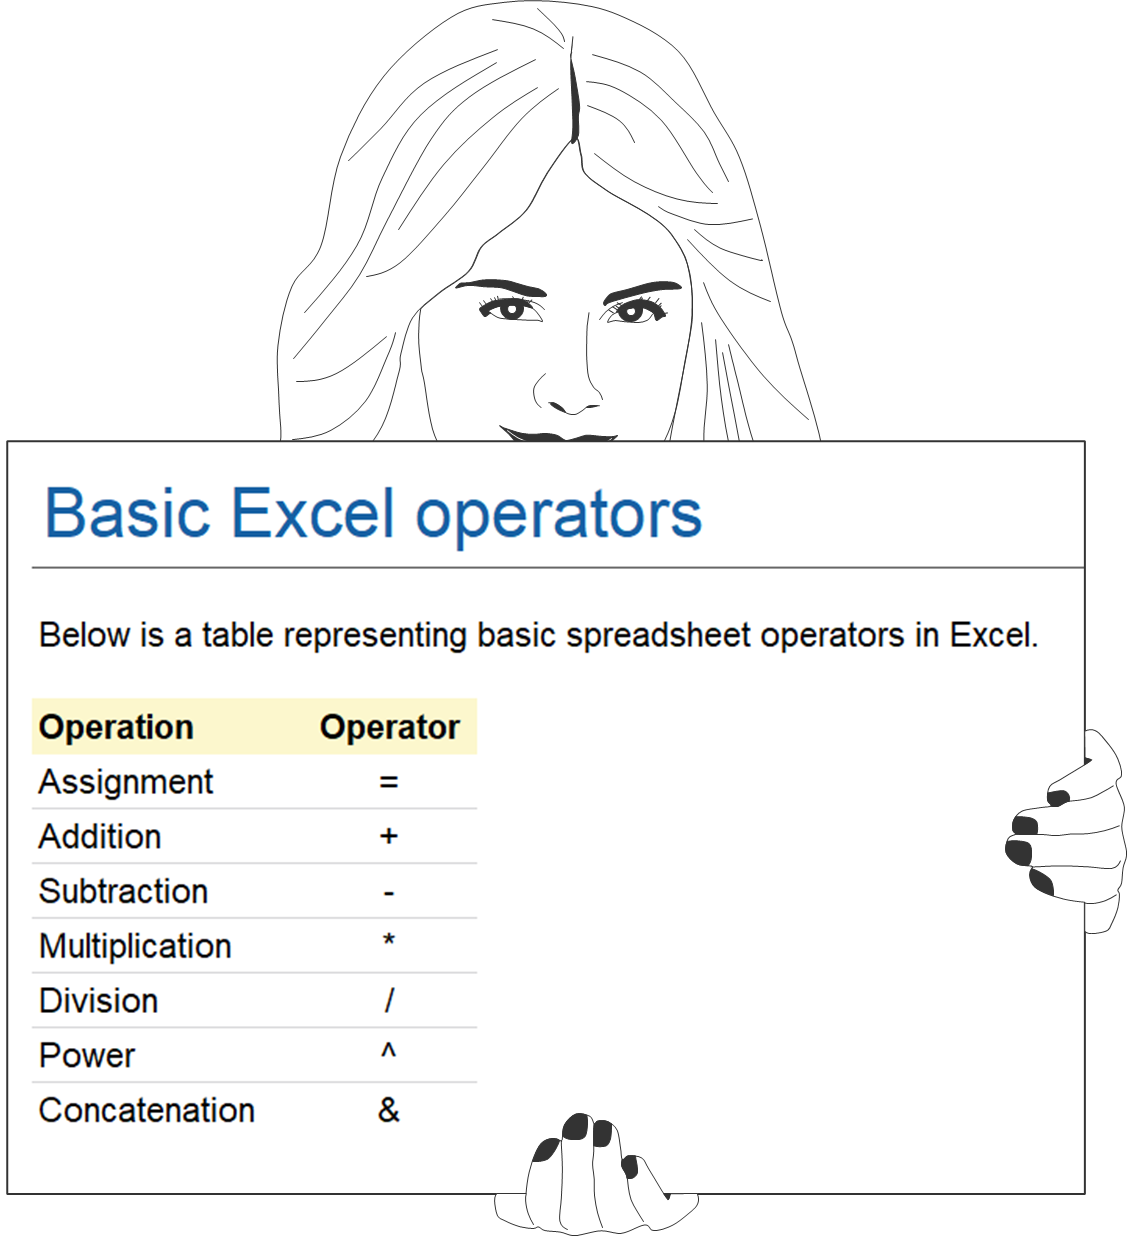 Basic Excel operators I - Excel Effects